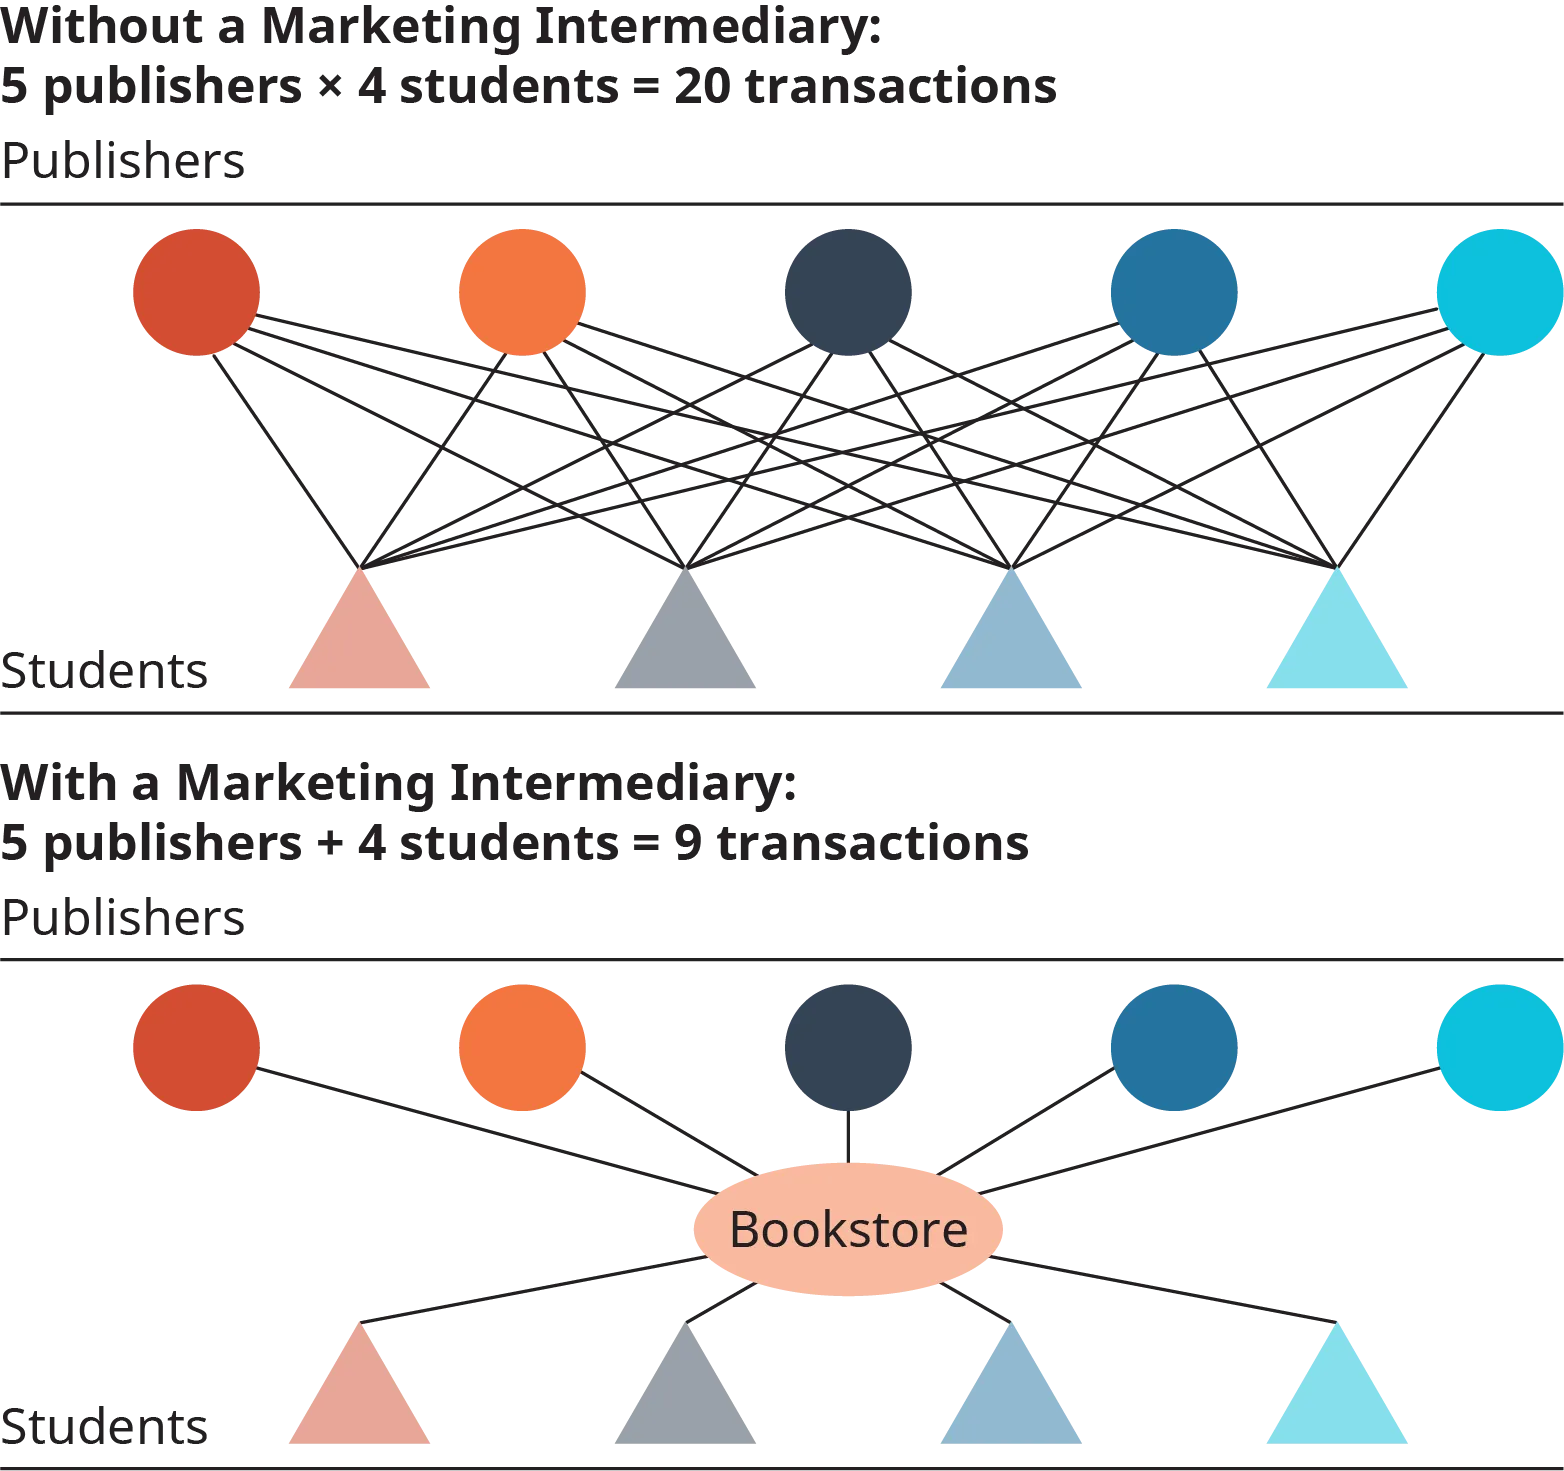 In both diagrams, the publishers are shown as circles, and the students as triangles. The first diagram is titled, without a marketing intermediary; 5 publishers times 4 students equals 20 transactions. There are 4 lines extending from each publisher to each student. The second diagram is titled, with a marketing intermediary; 5 publishers plus 4 students equal 9 transactions. A line extends from each publisher and student to a central bookstore.